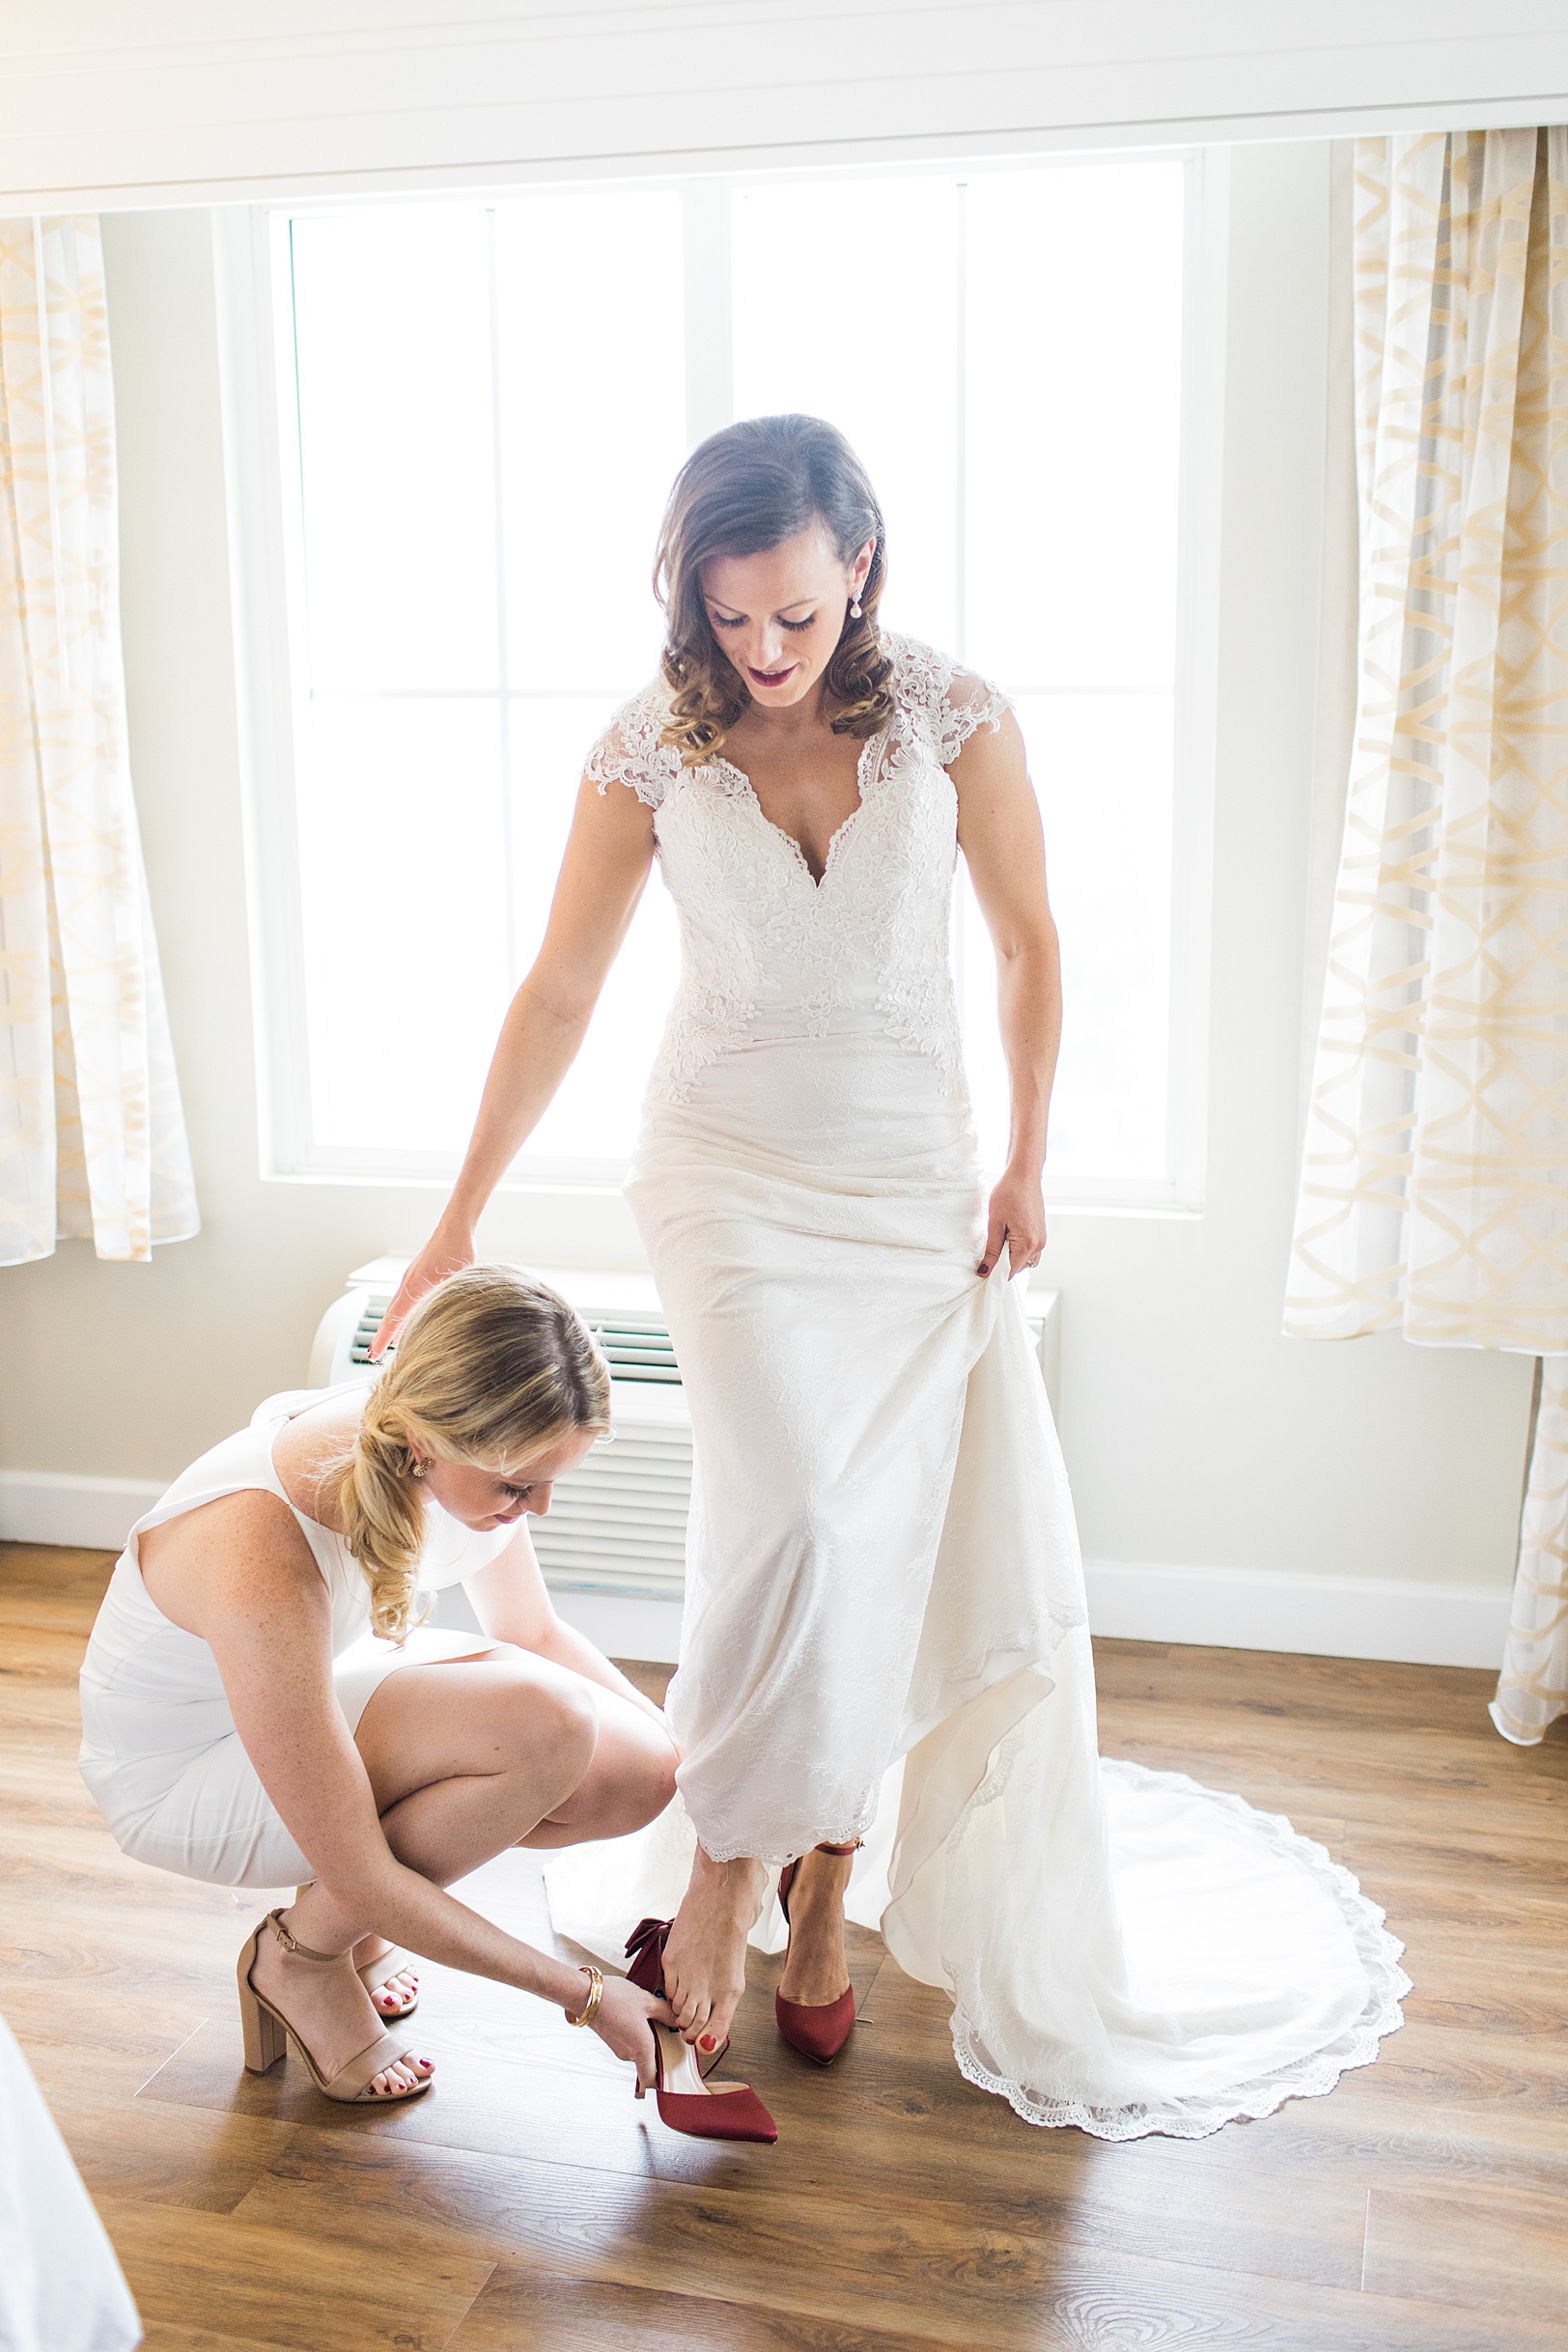 Getting Ready at Hotel | Wedding Photography by Kaitlin Scott